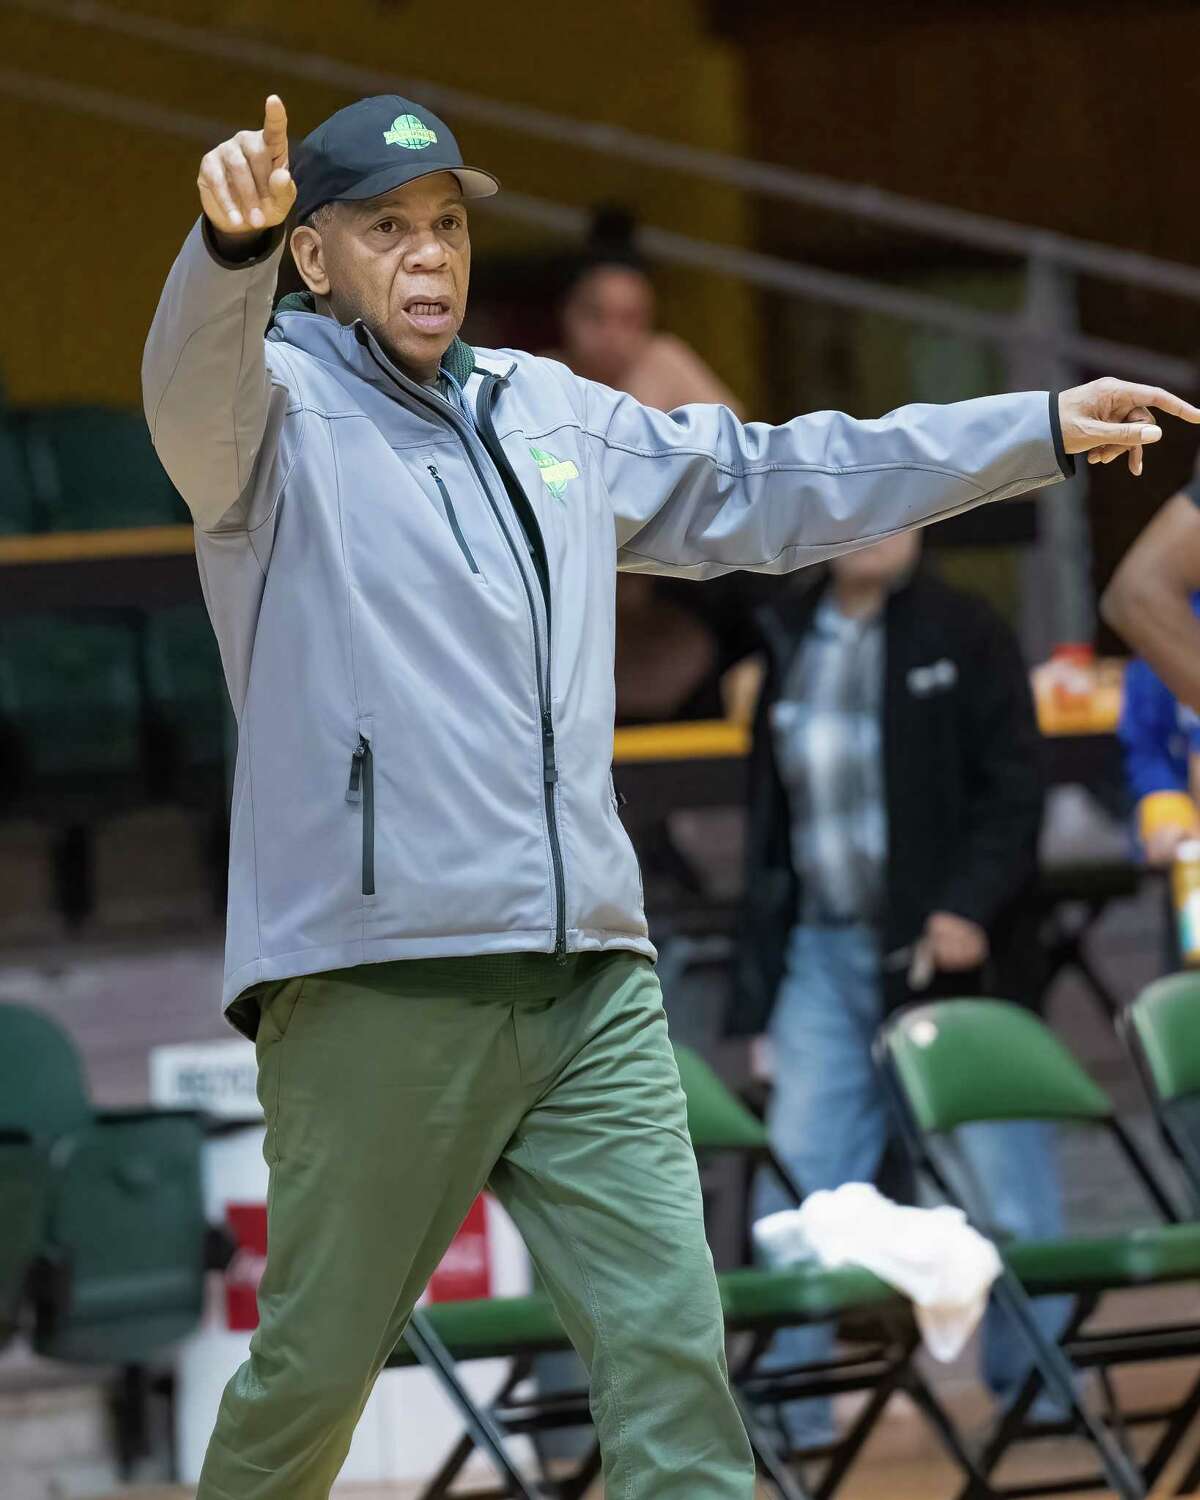 Albany Patroons head coach Derrick Rowland instructs prospective players during training camp on Tuesday, Feb. 21, 2023, at The Armory in Albany, NY.